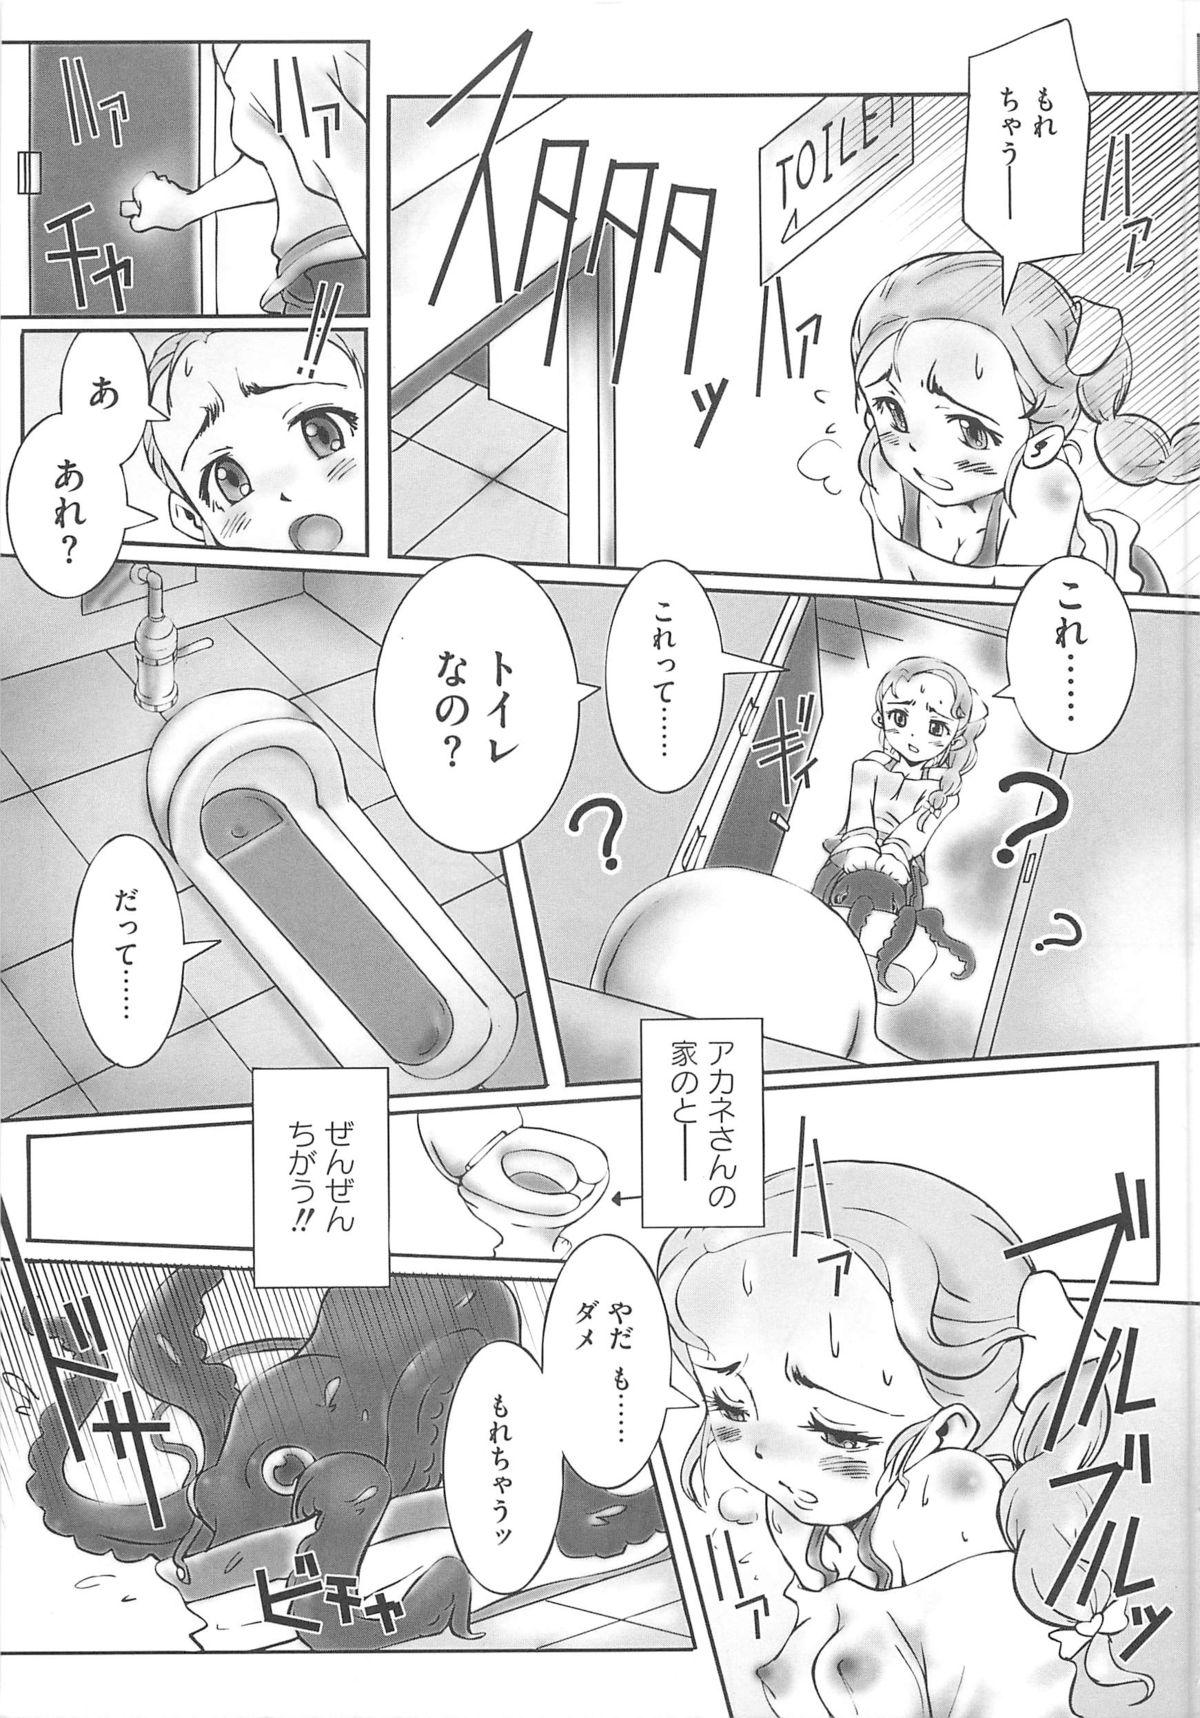 First Time Erocure MAX - Futacure Max H - Pretty cure Thylinh - Page 12